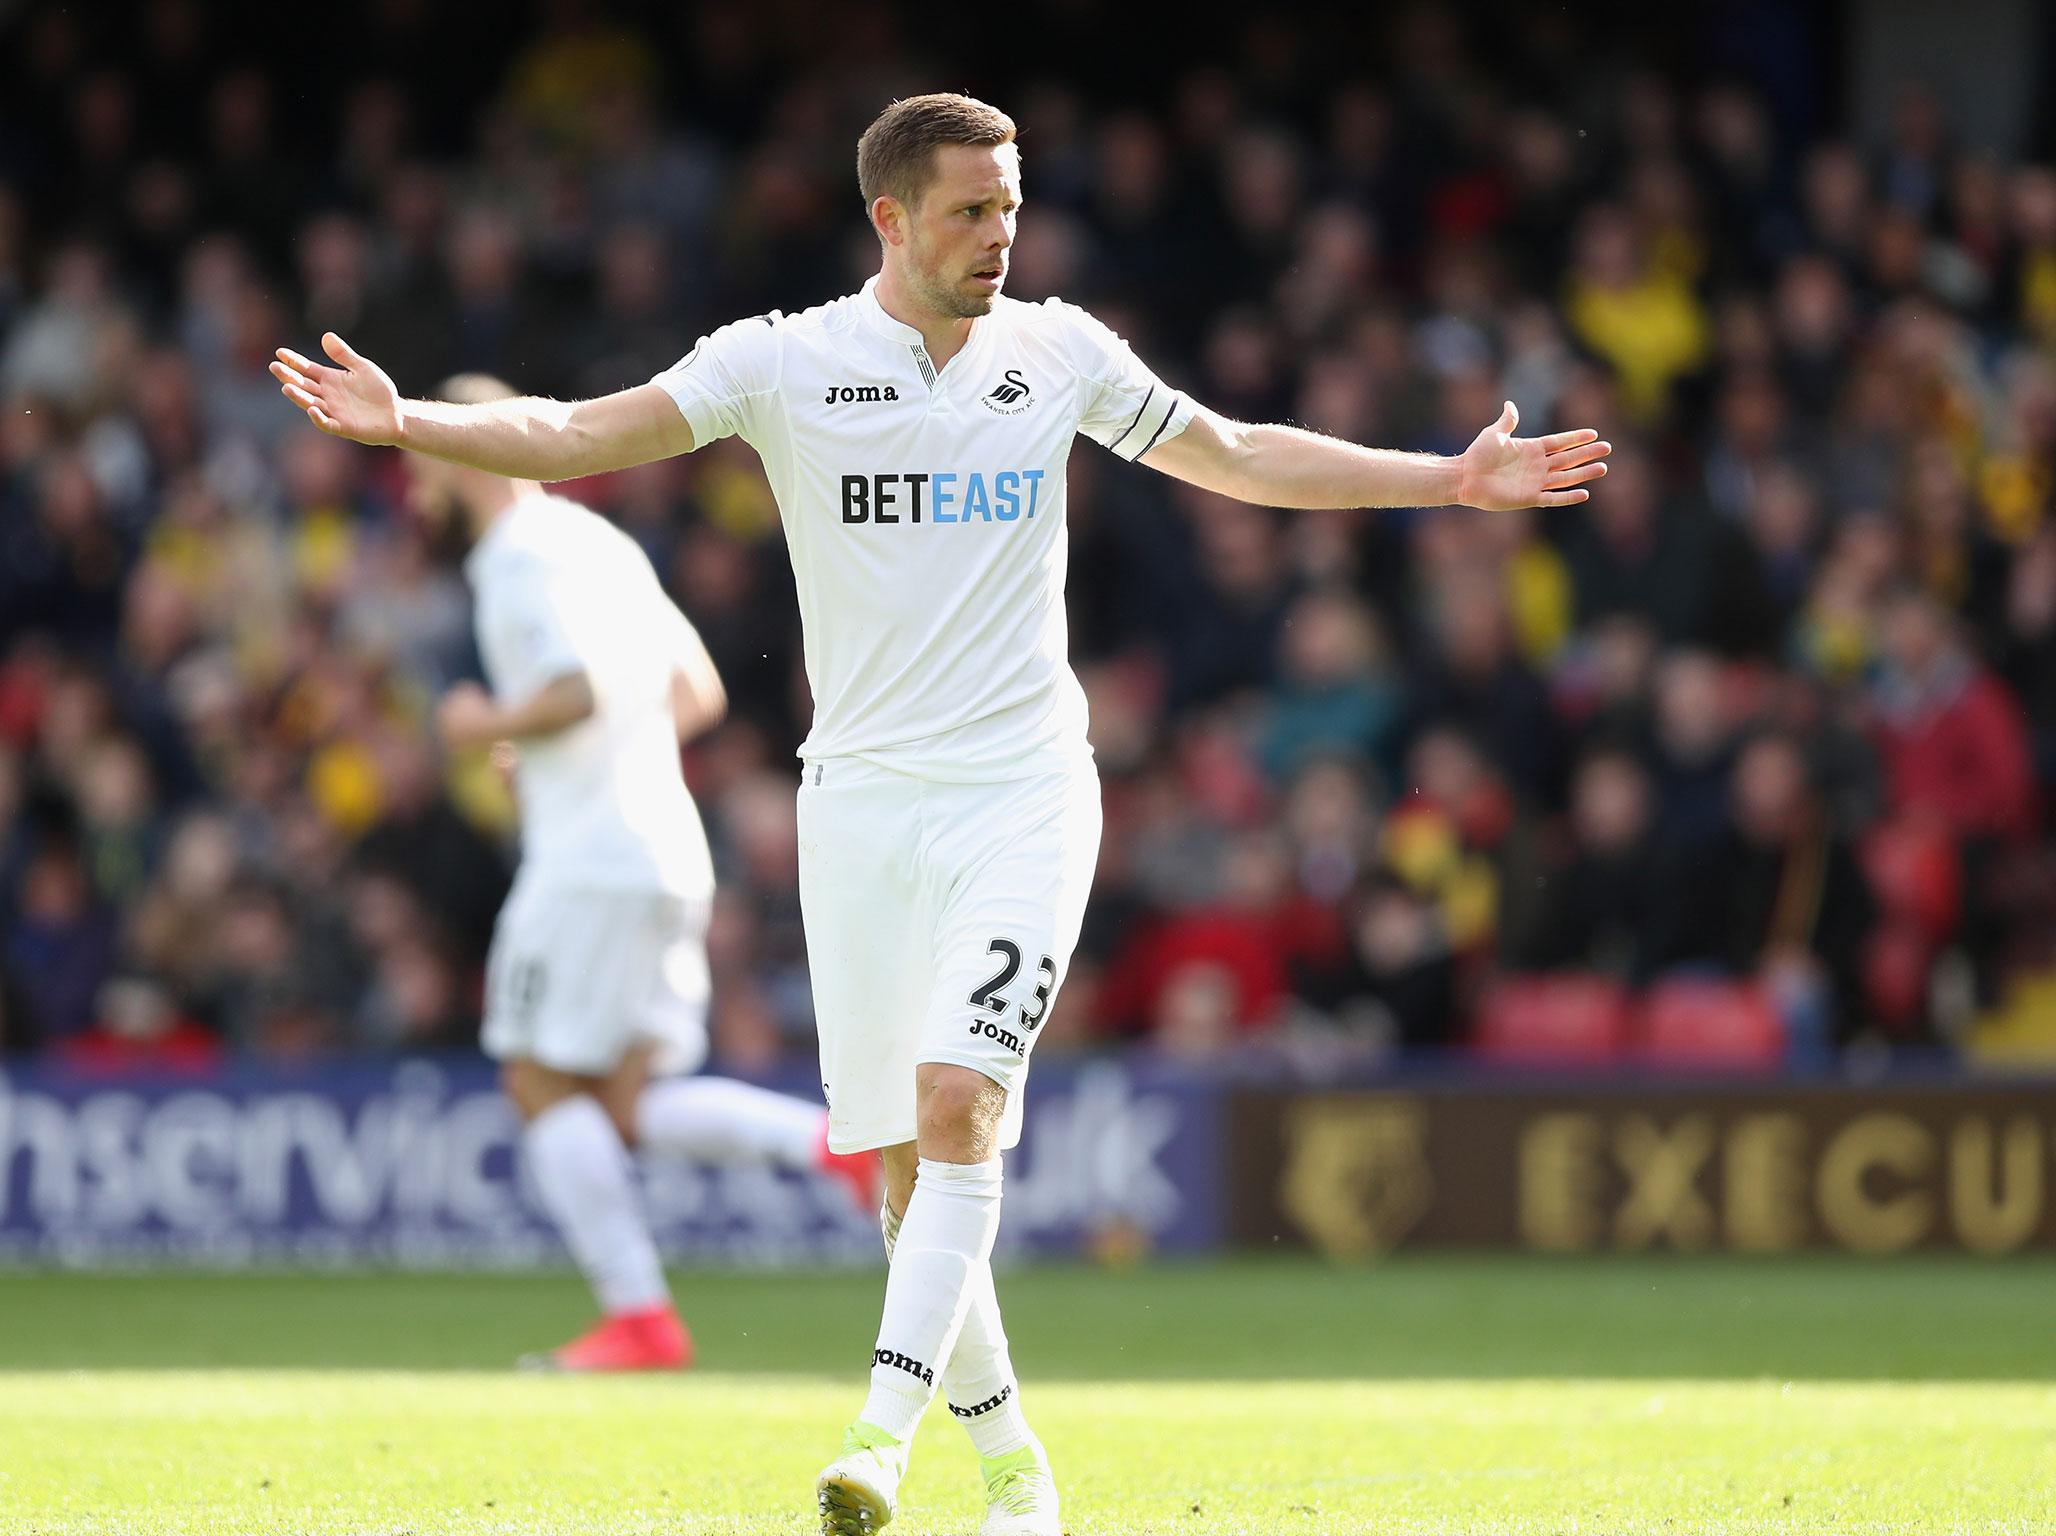 Sigurdsson pulled out of Swansea's pre-season tour to the United States after Everton's interest had become clear